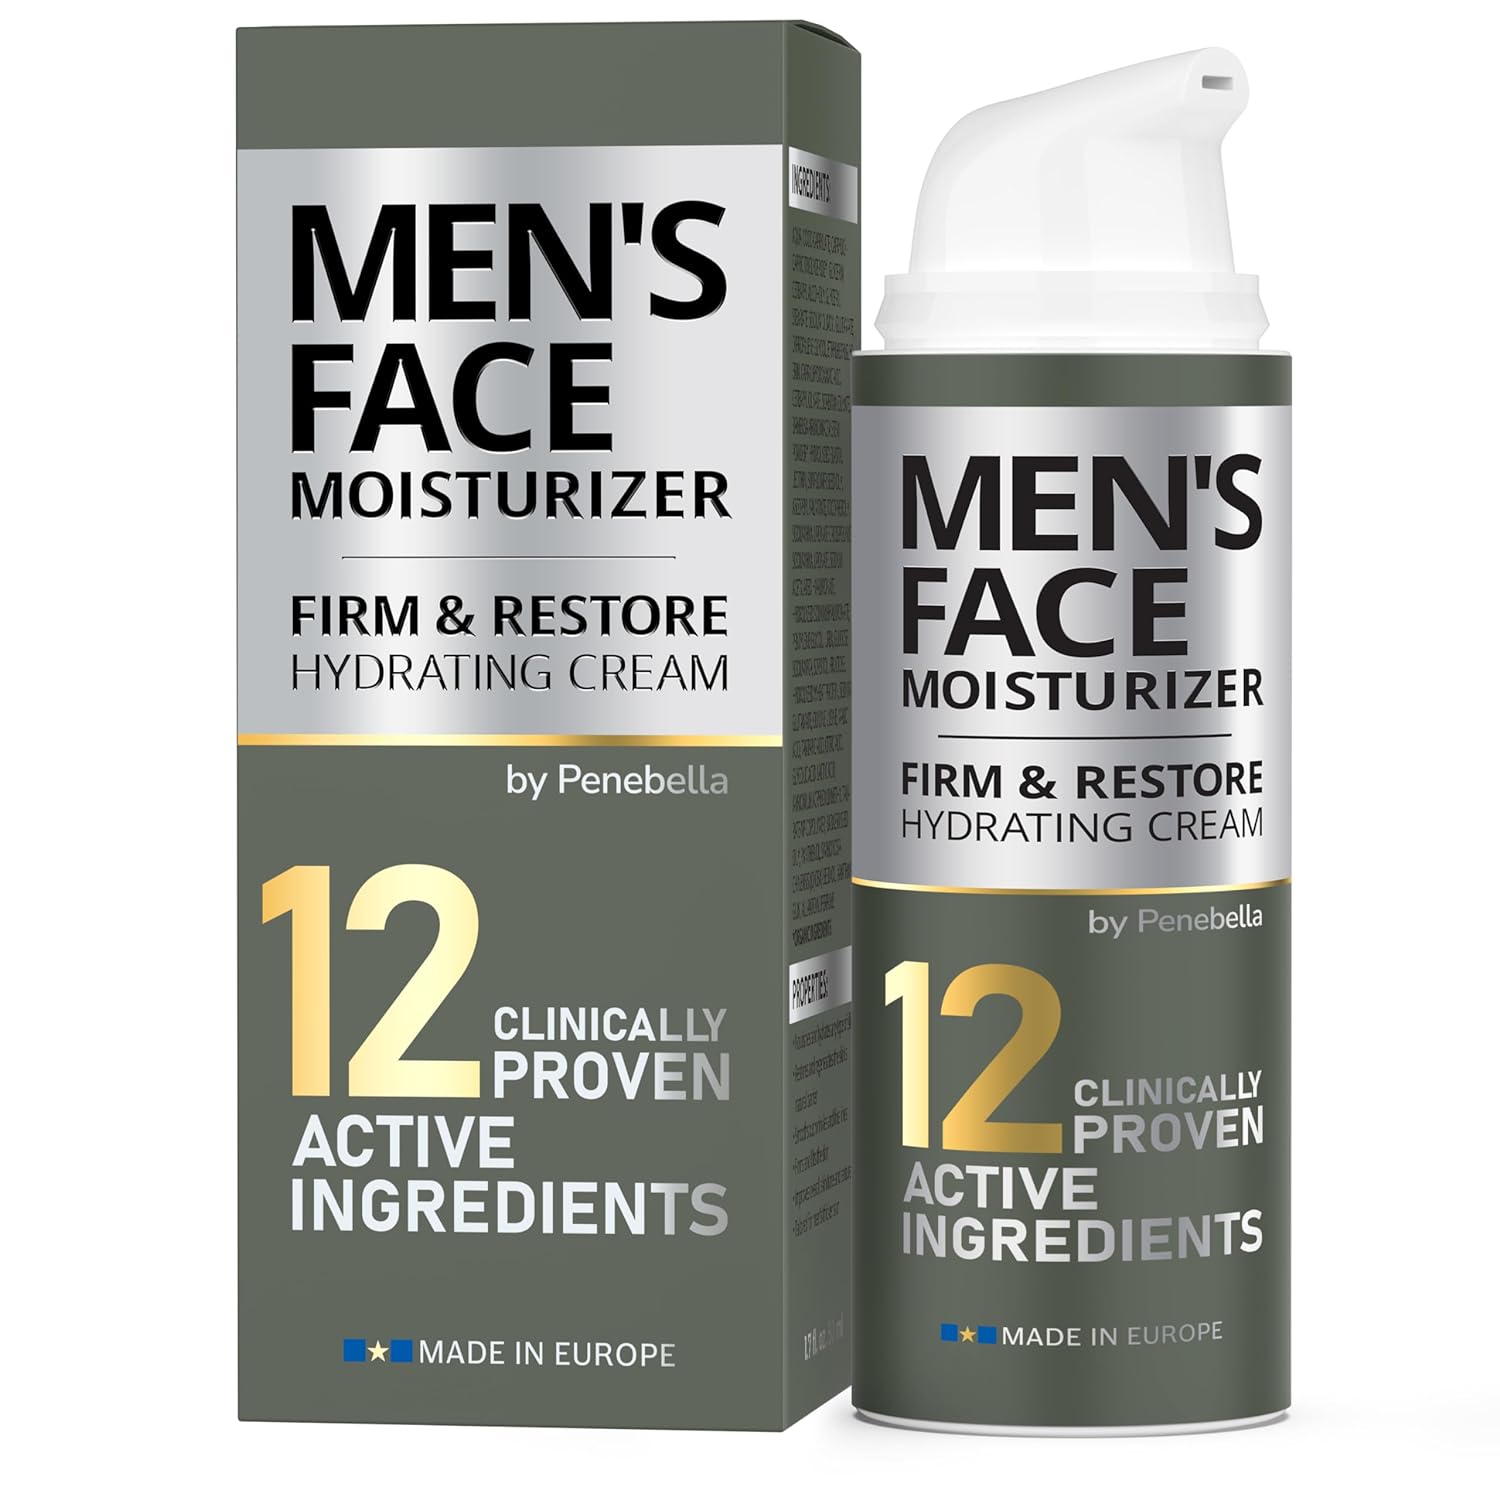 Mens Face Moisturizer Cream - Anti-Aging Face & Neck Serum for Men - Firming & Lifting Anti-Wrinkle Facial Day & Night Skin Care Complex with Hyaluronic Acid - Made in Europe - Elastin